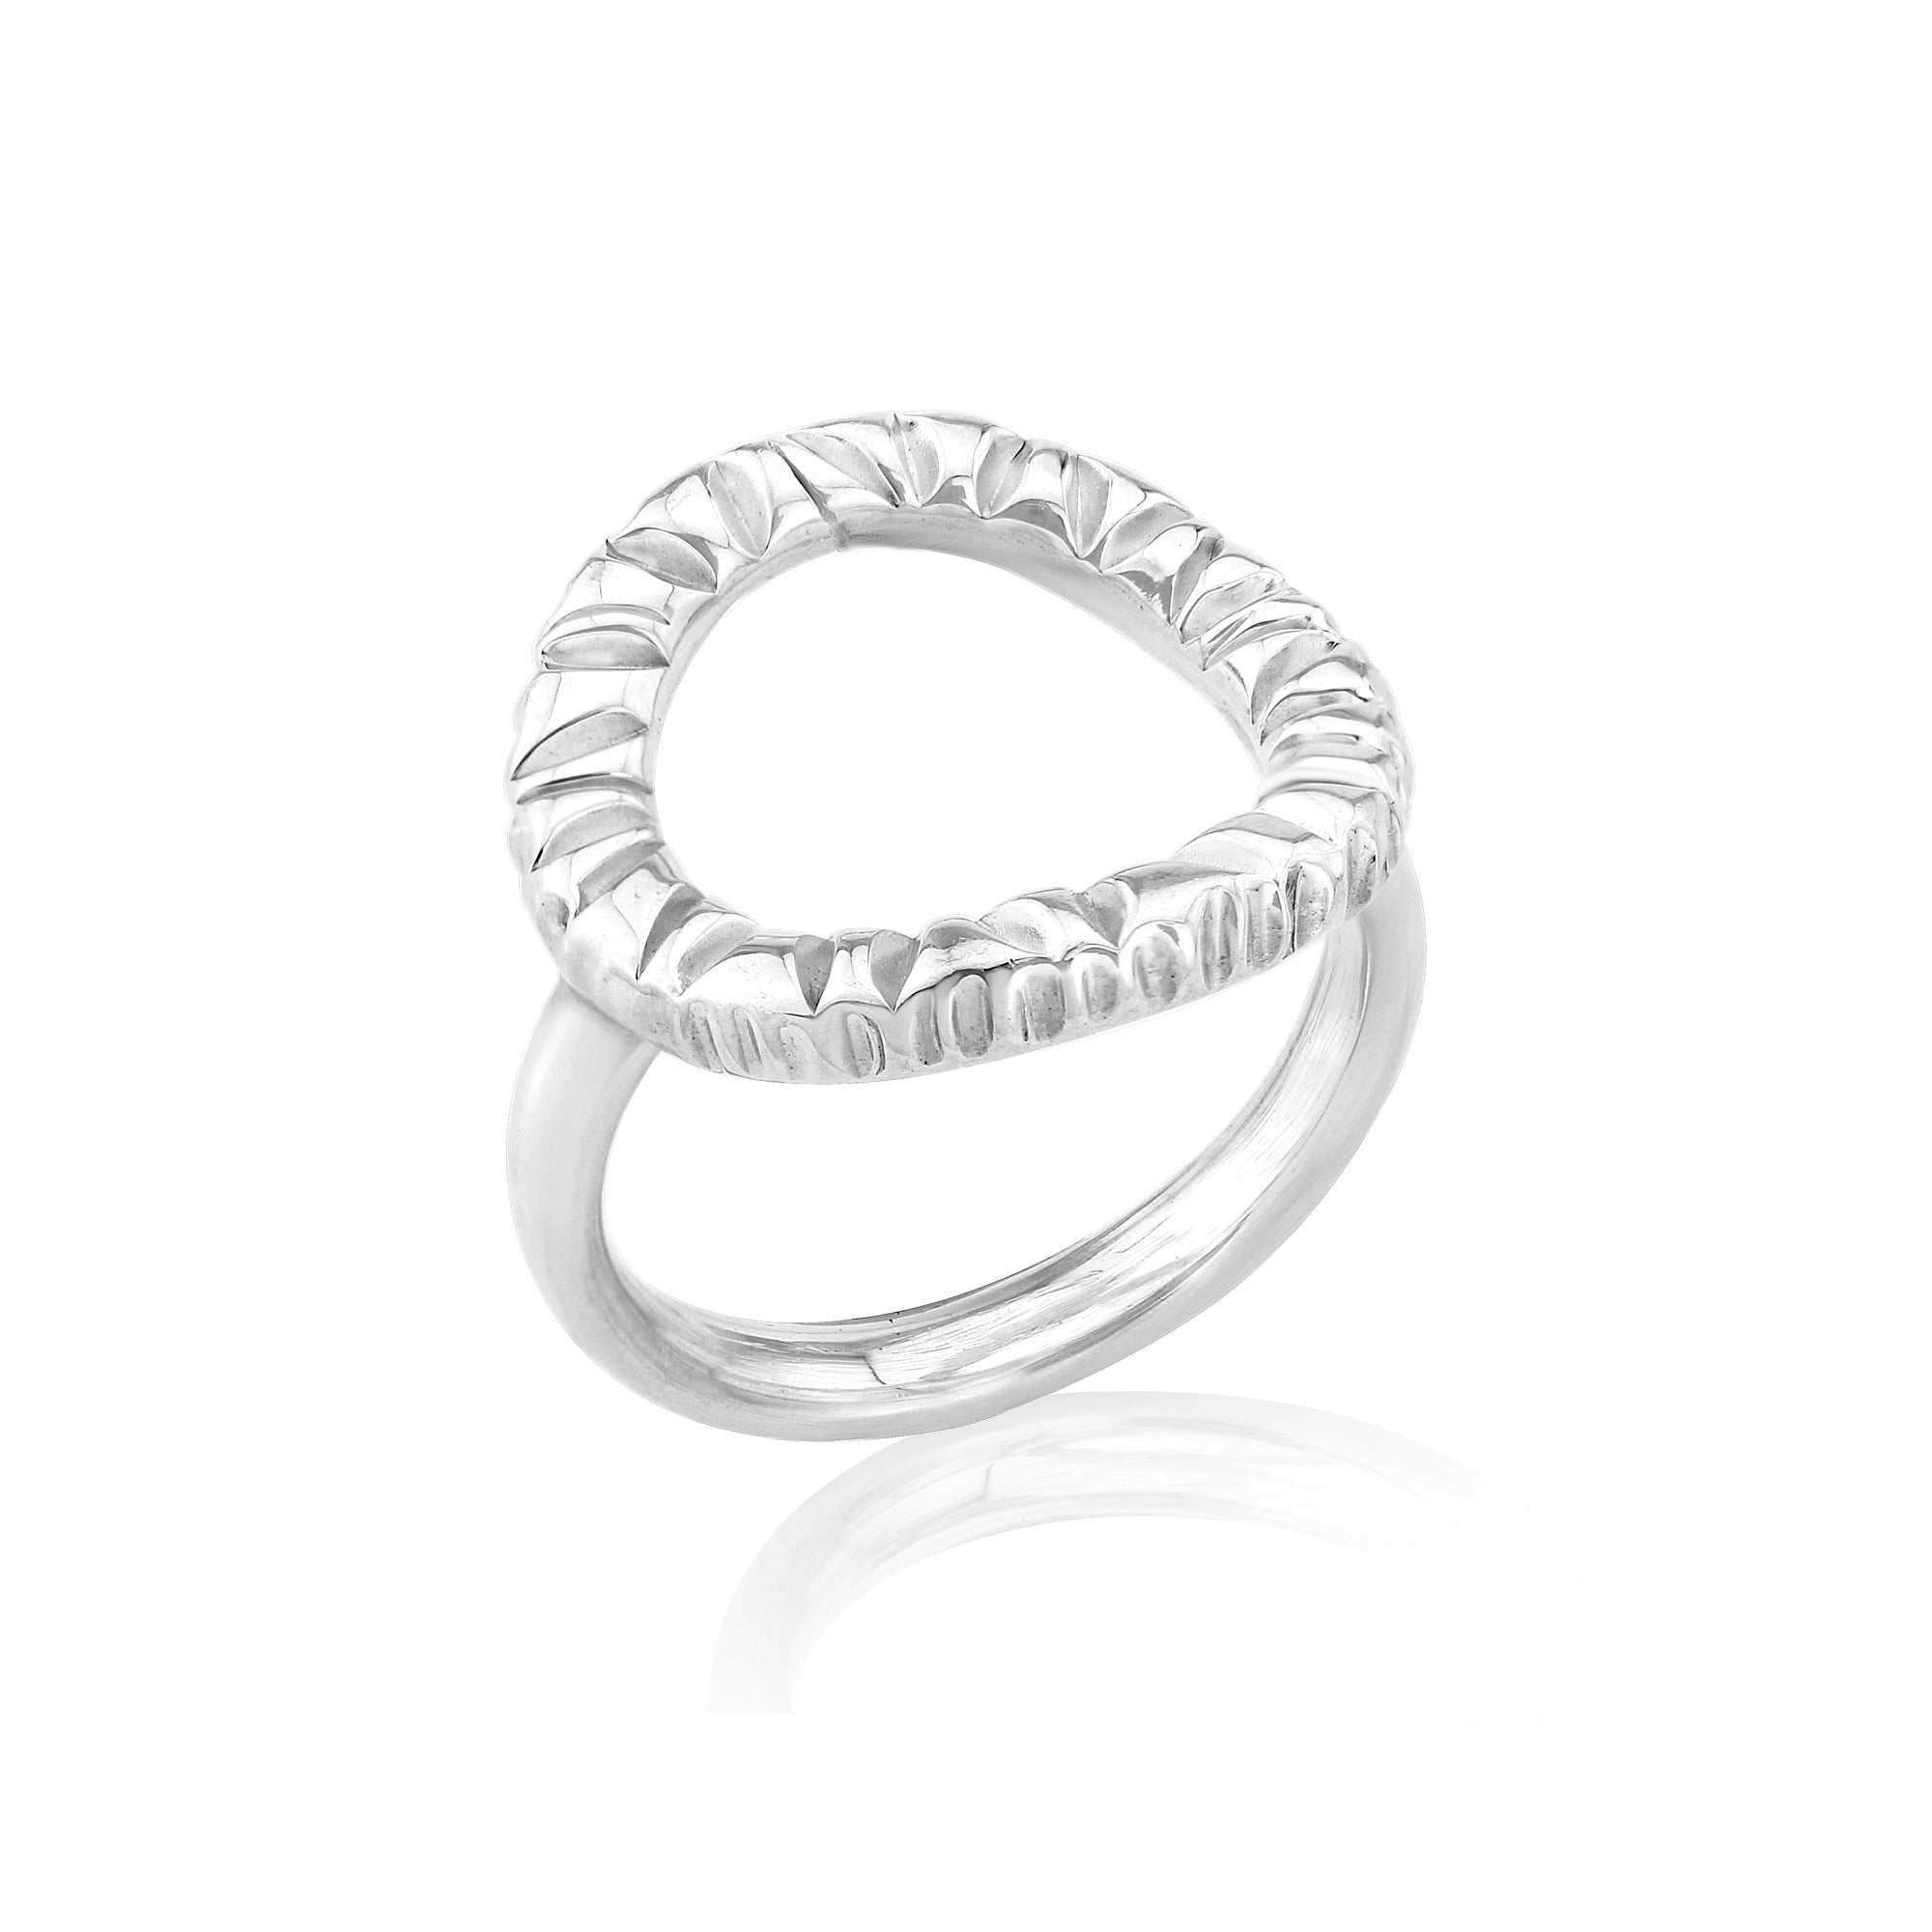 Handcrafted Silver Textured Halo Ring